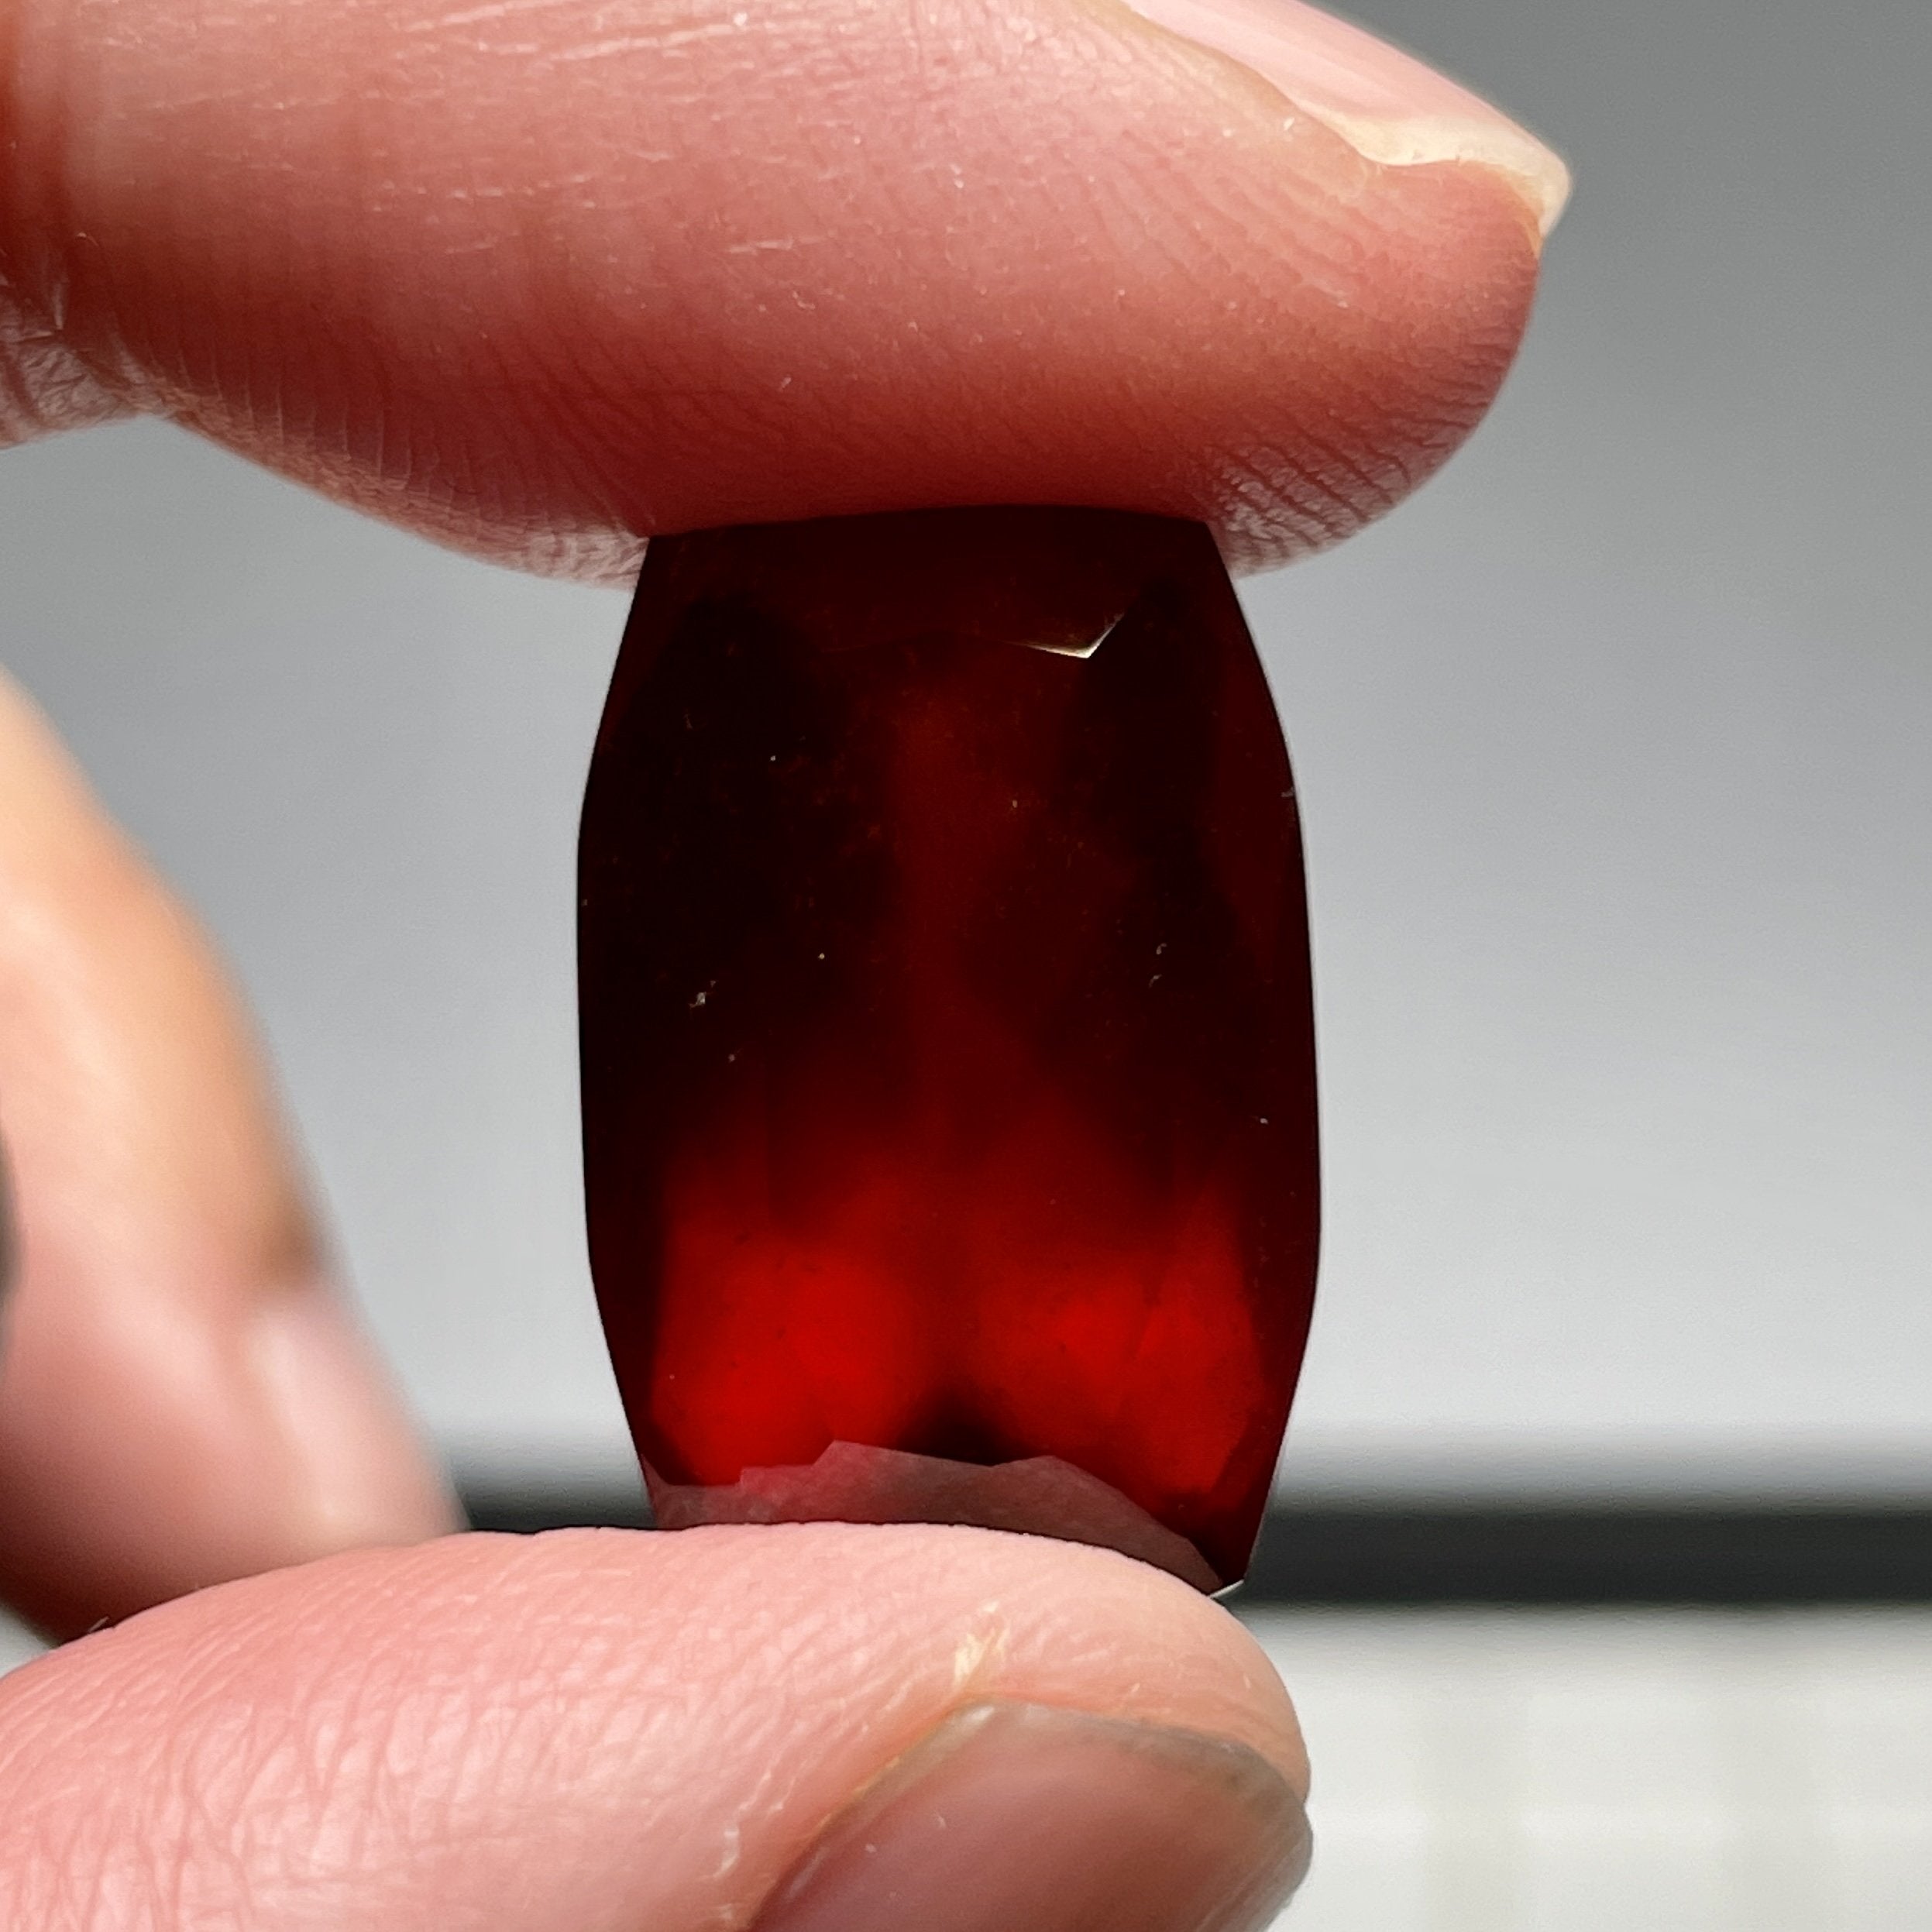 23.80Ct Hessonite Garnet Tanzania Untreated Unheated. 20 X 12.5 9 Mm. Use Either Side.